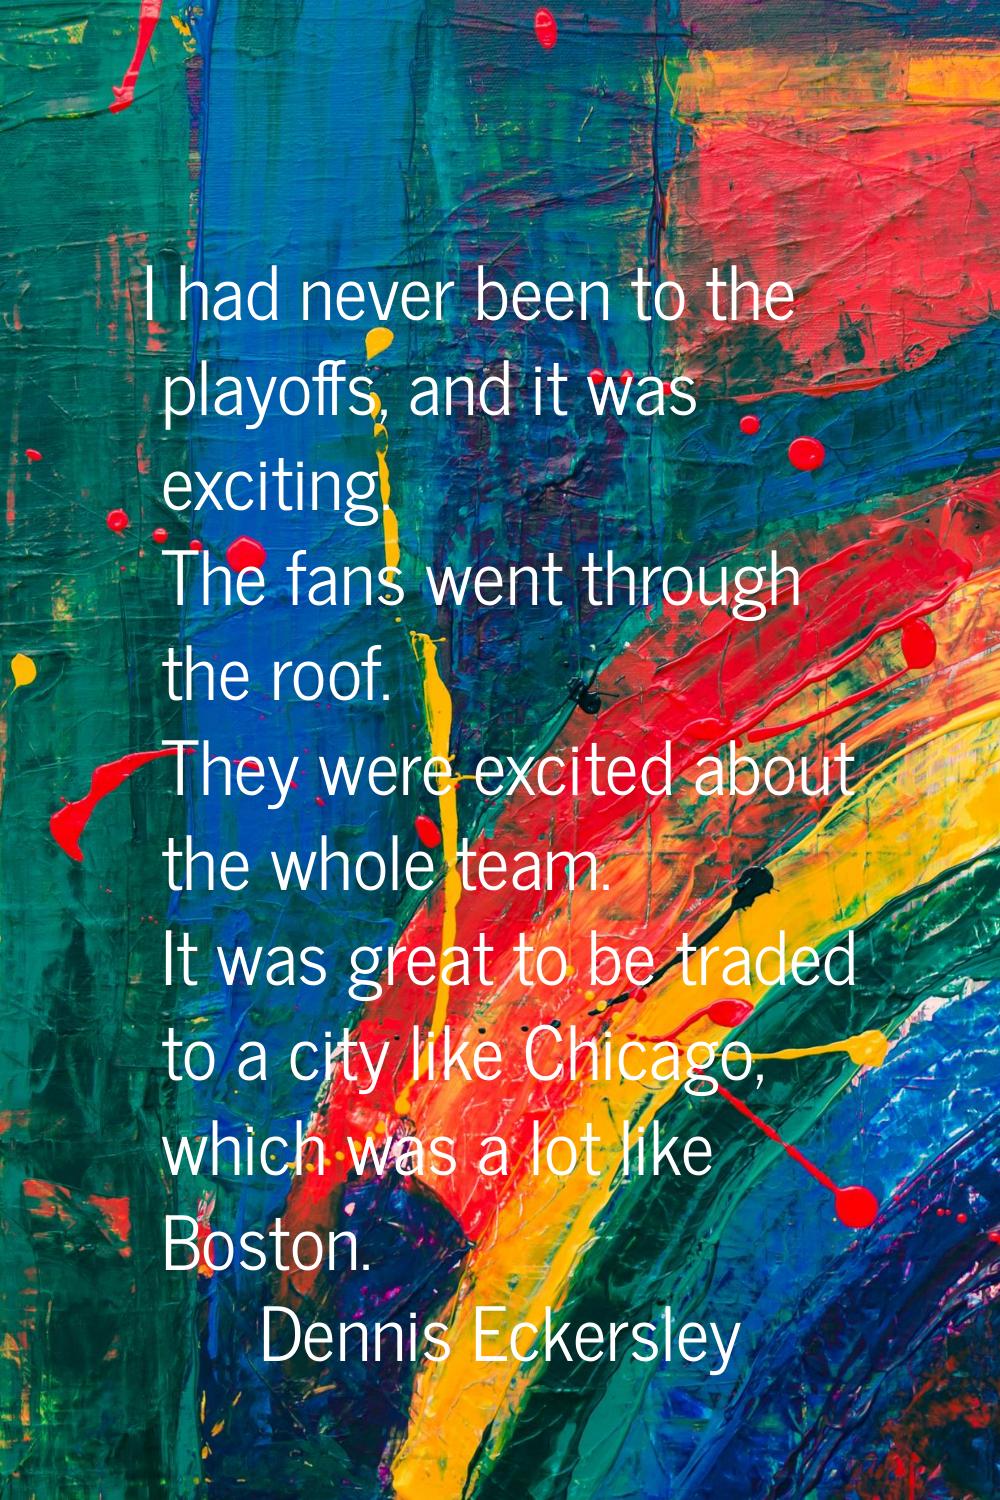 I had never been to the playoffs, and it was exciting. The fans went through the roof. They were ex